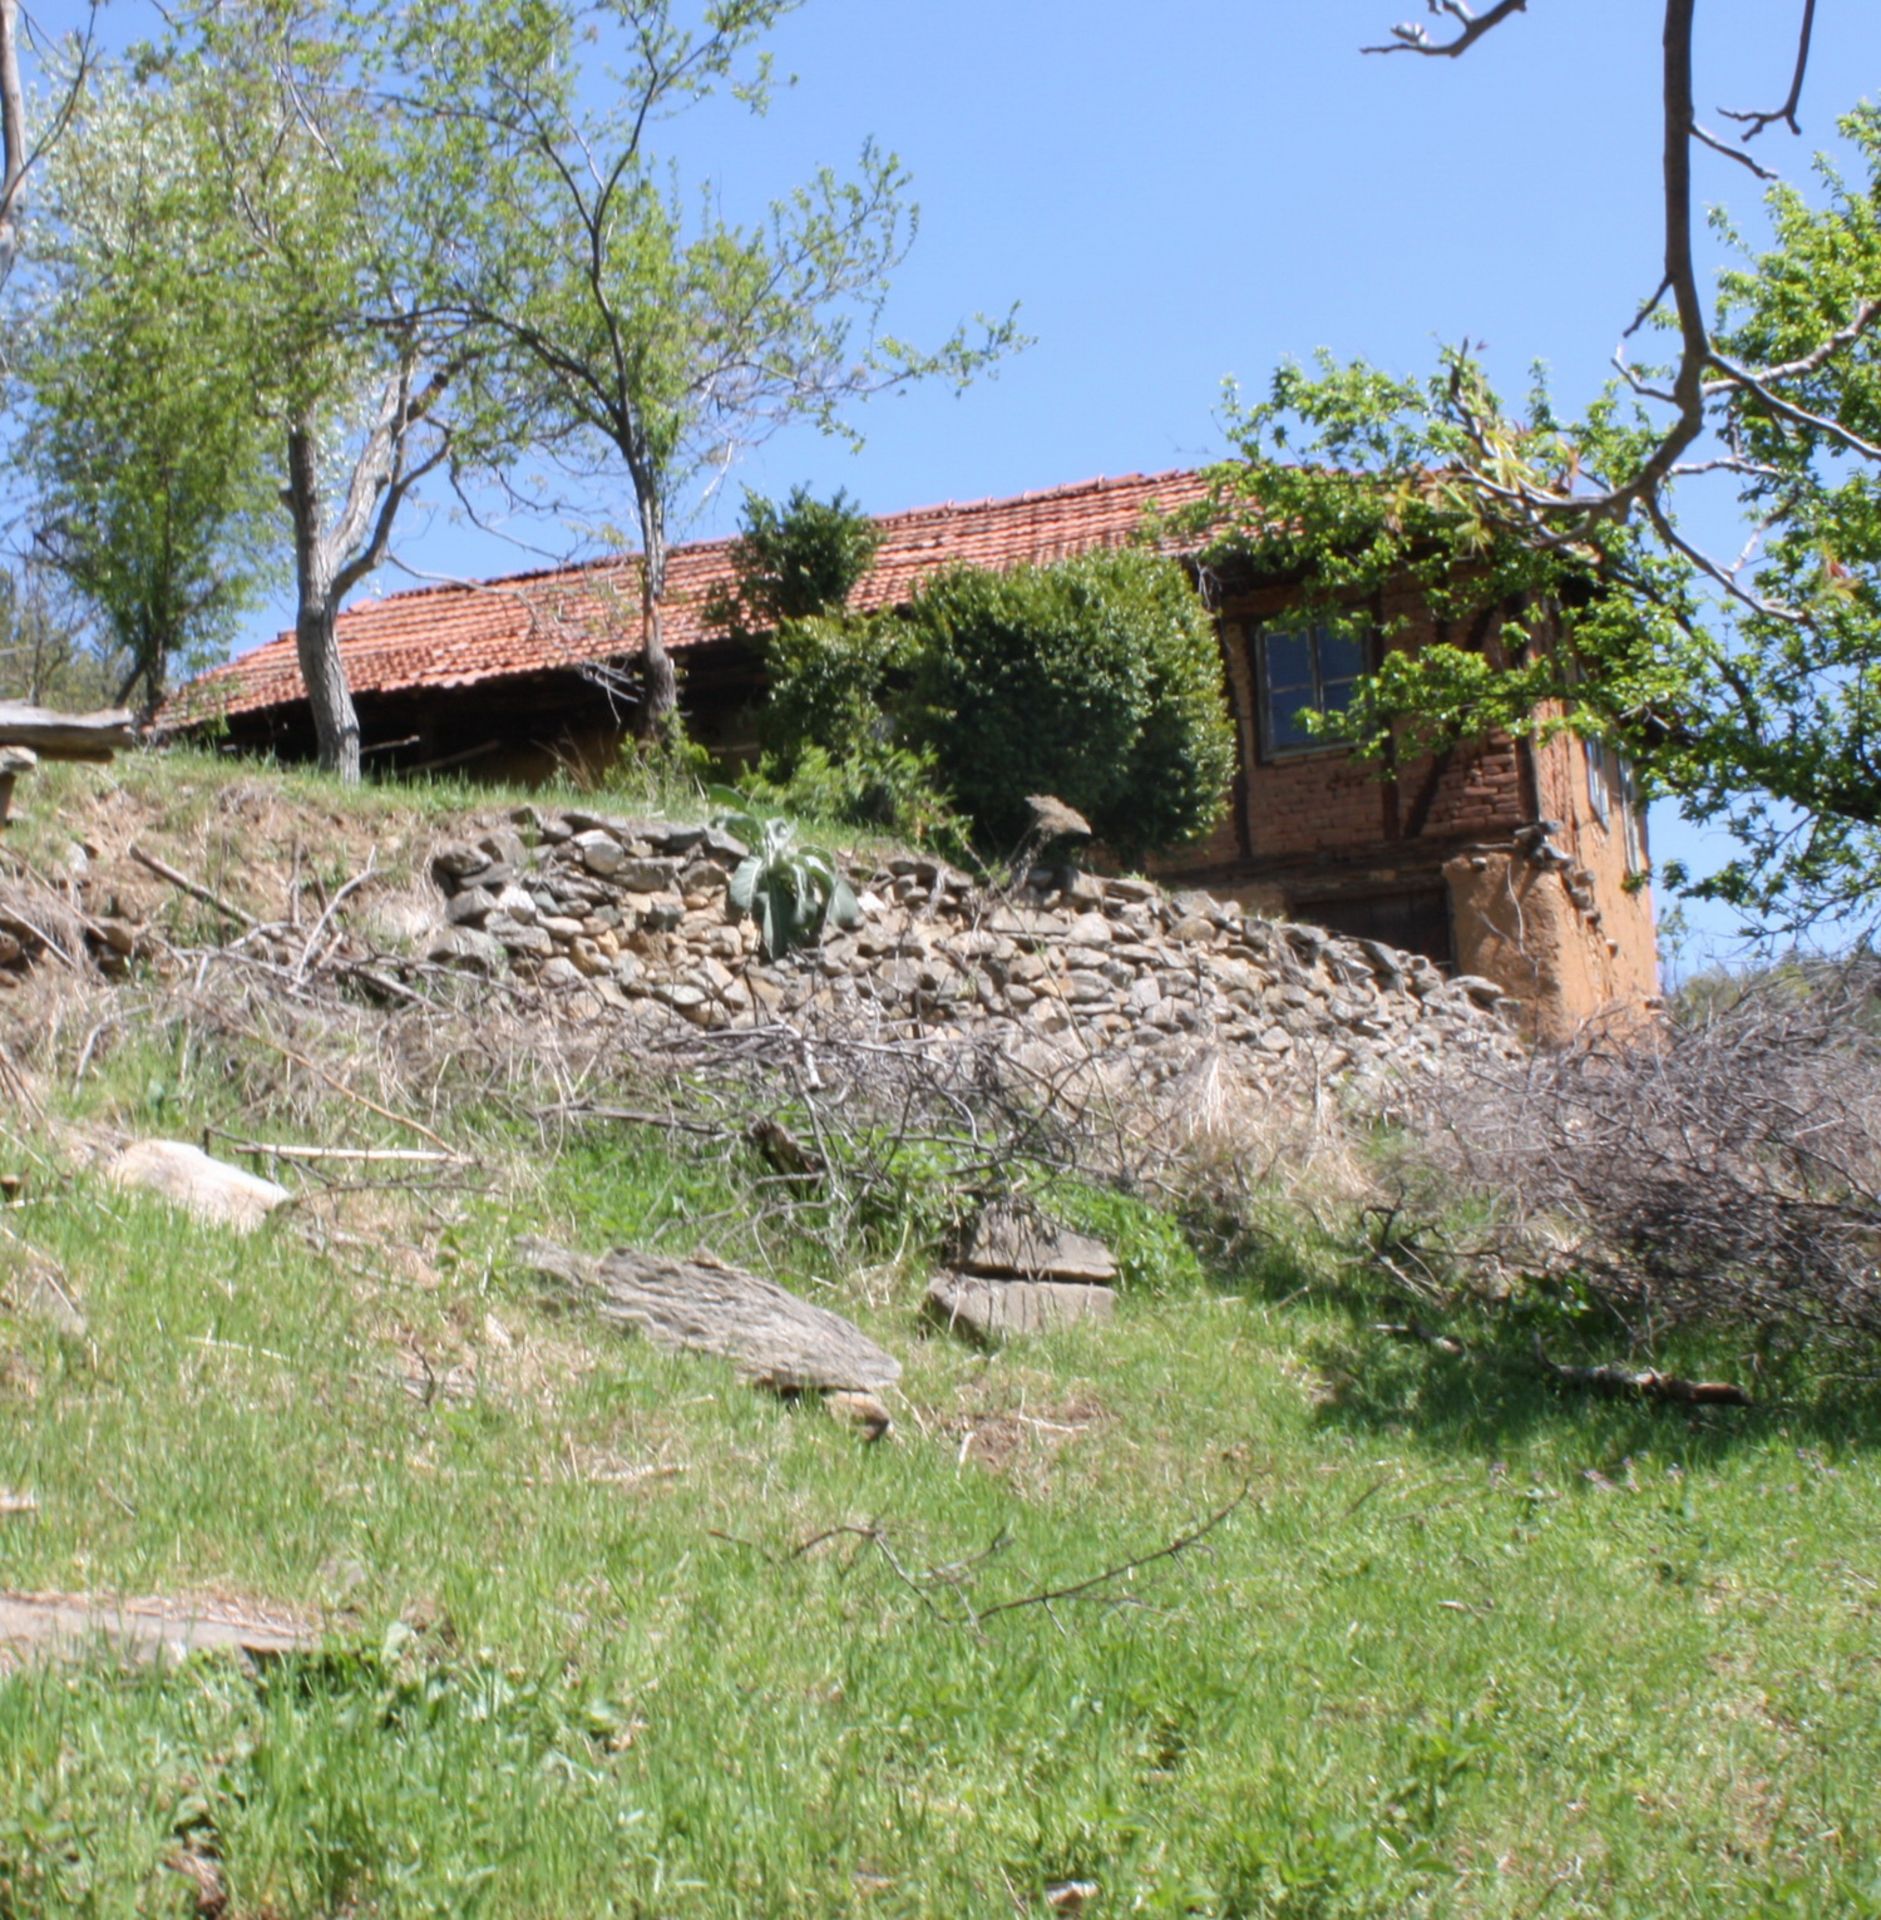 7.5 Acre Ranch in Bulgaria 1h from Sofia - Image 16 of 33